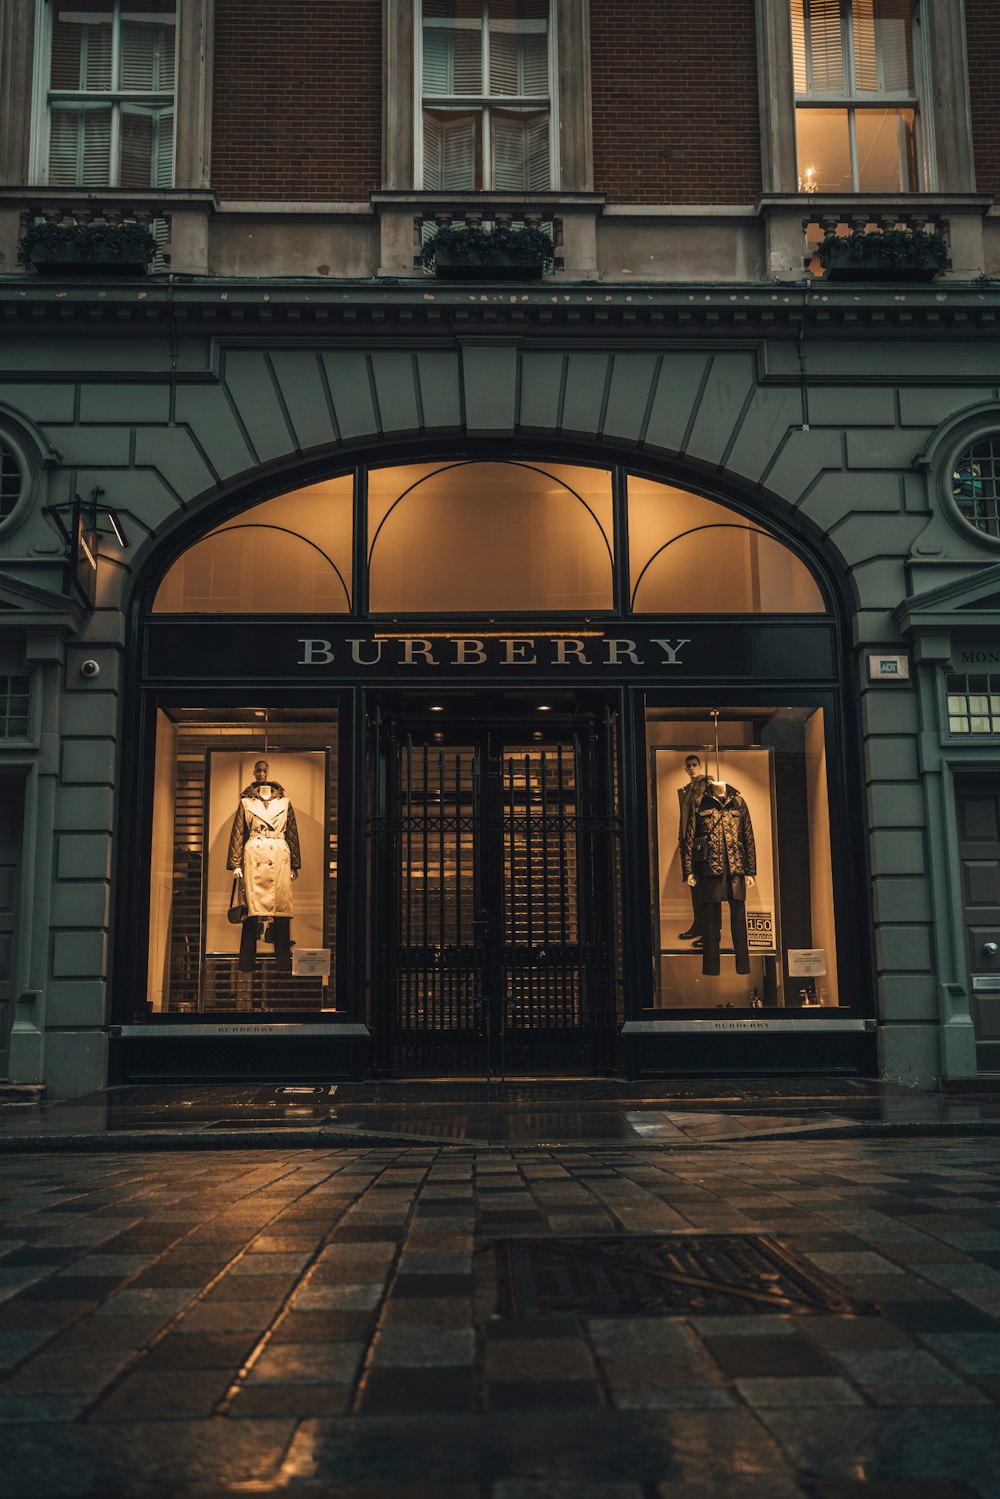 Burberry Pictures | Download Free Images on Unsplash